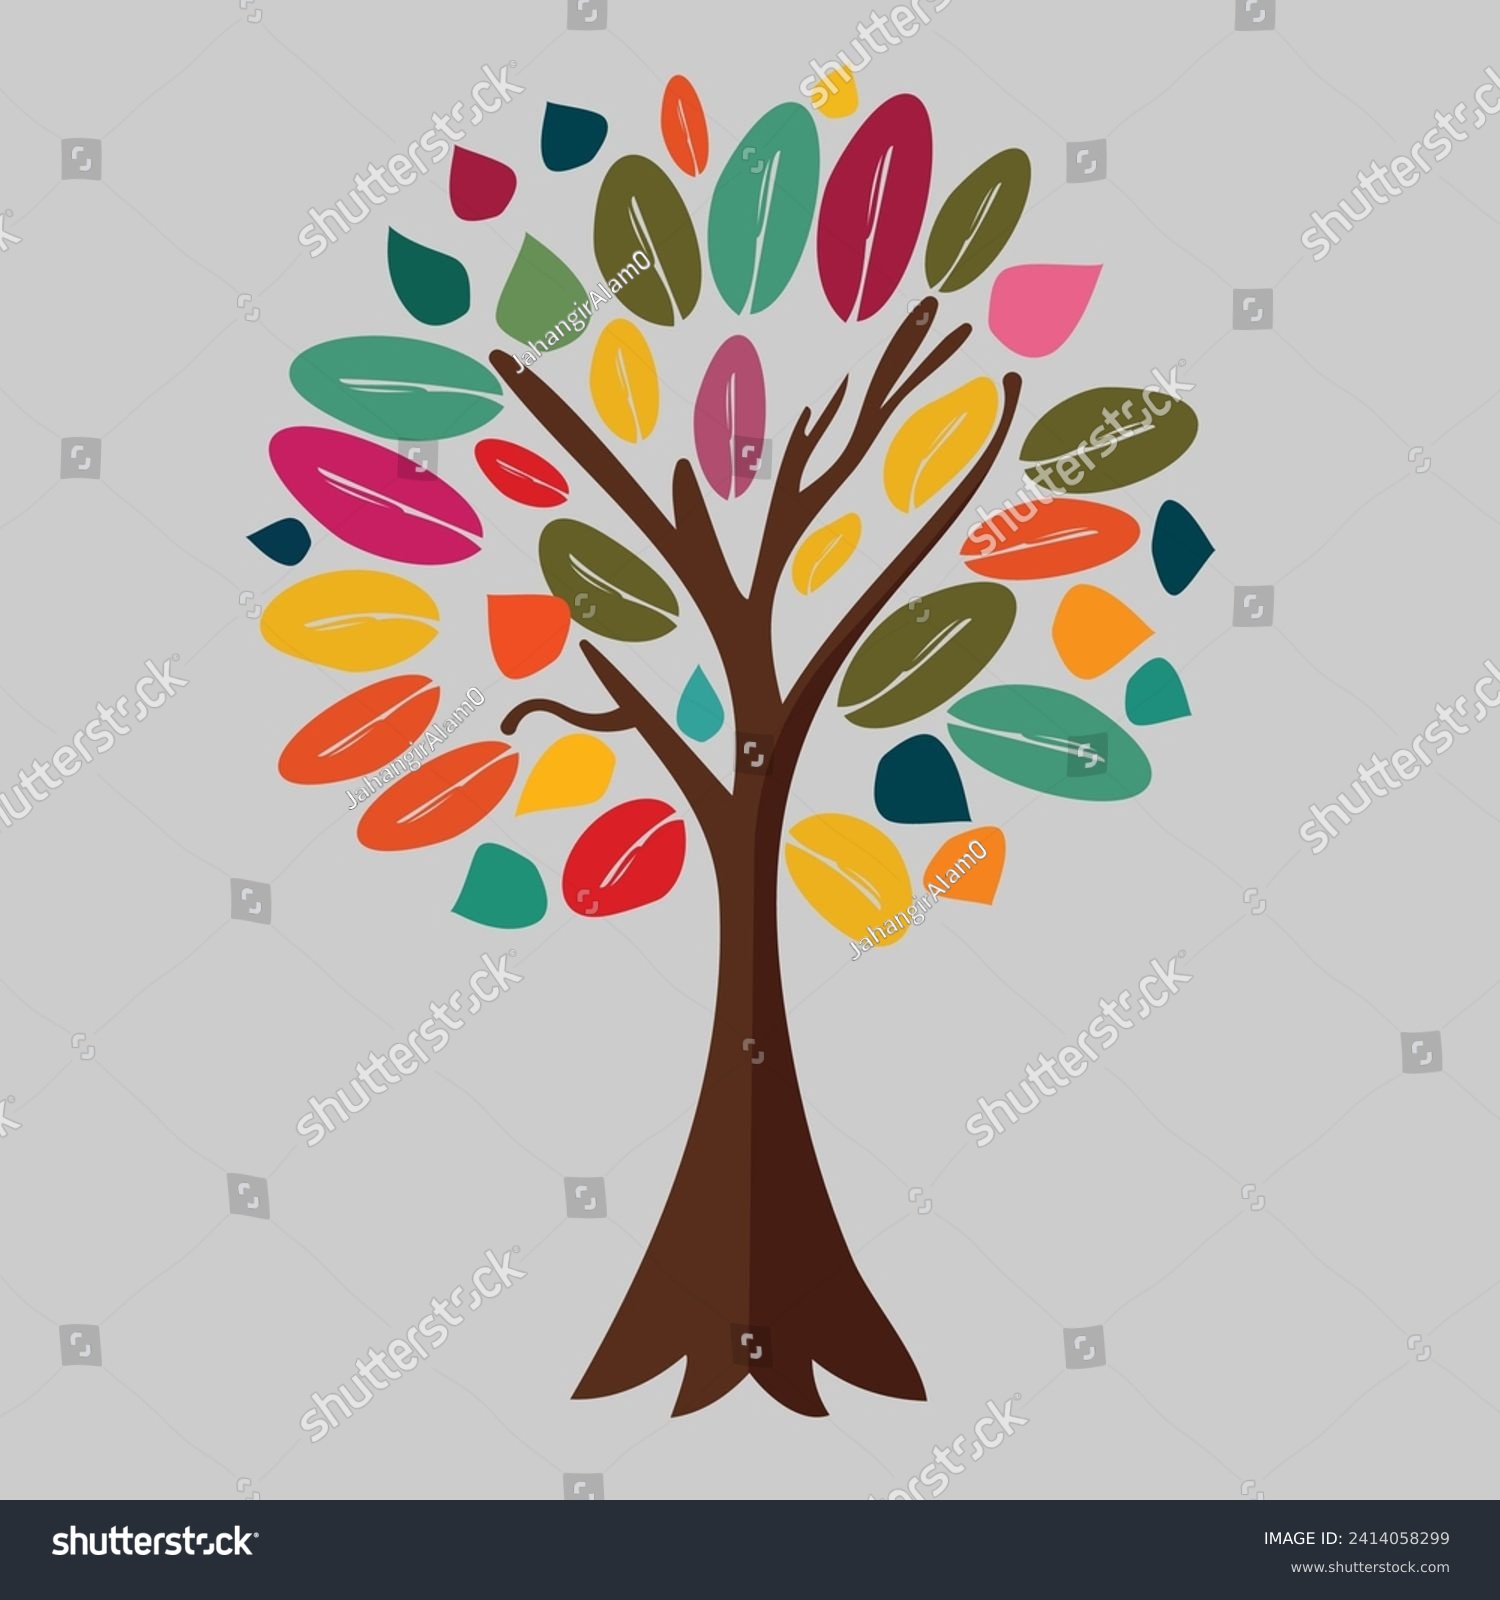 SVG of tree vector elegant custom colorful with vibrant leaves hanging branches illustration svg